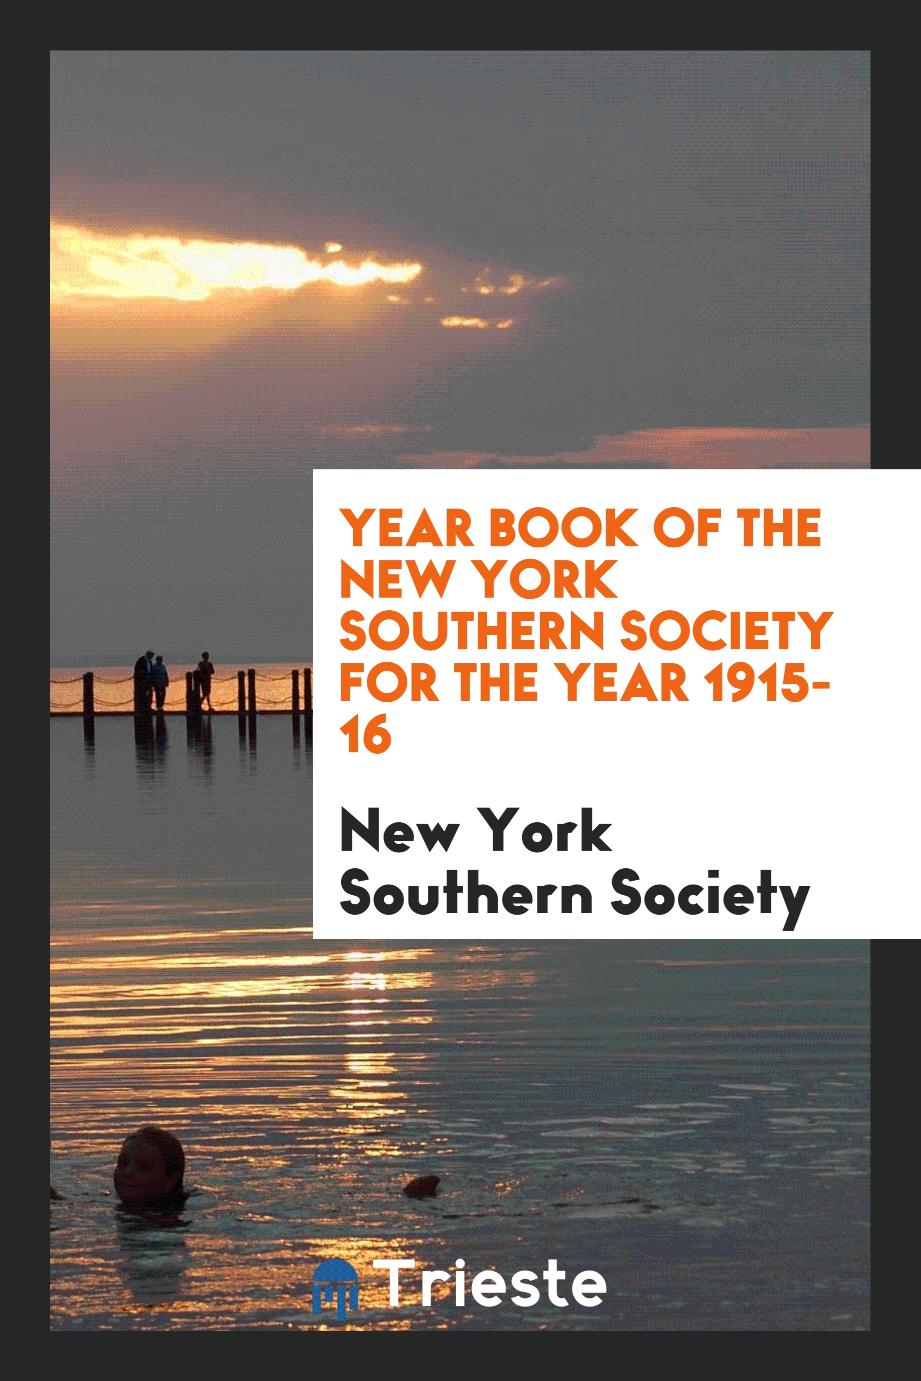 Year Book of the New York Southern Society for the Year 1915-16